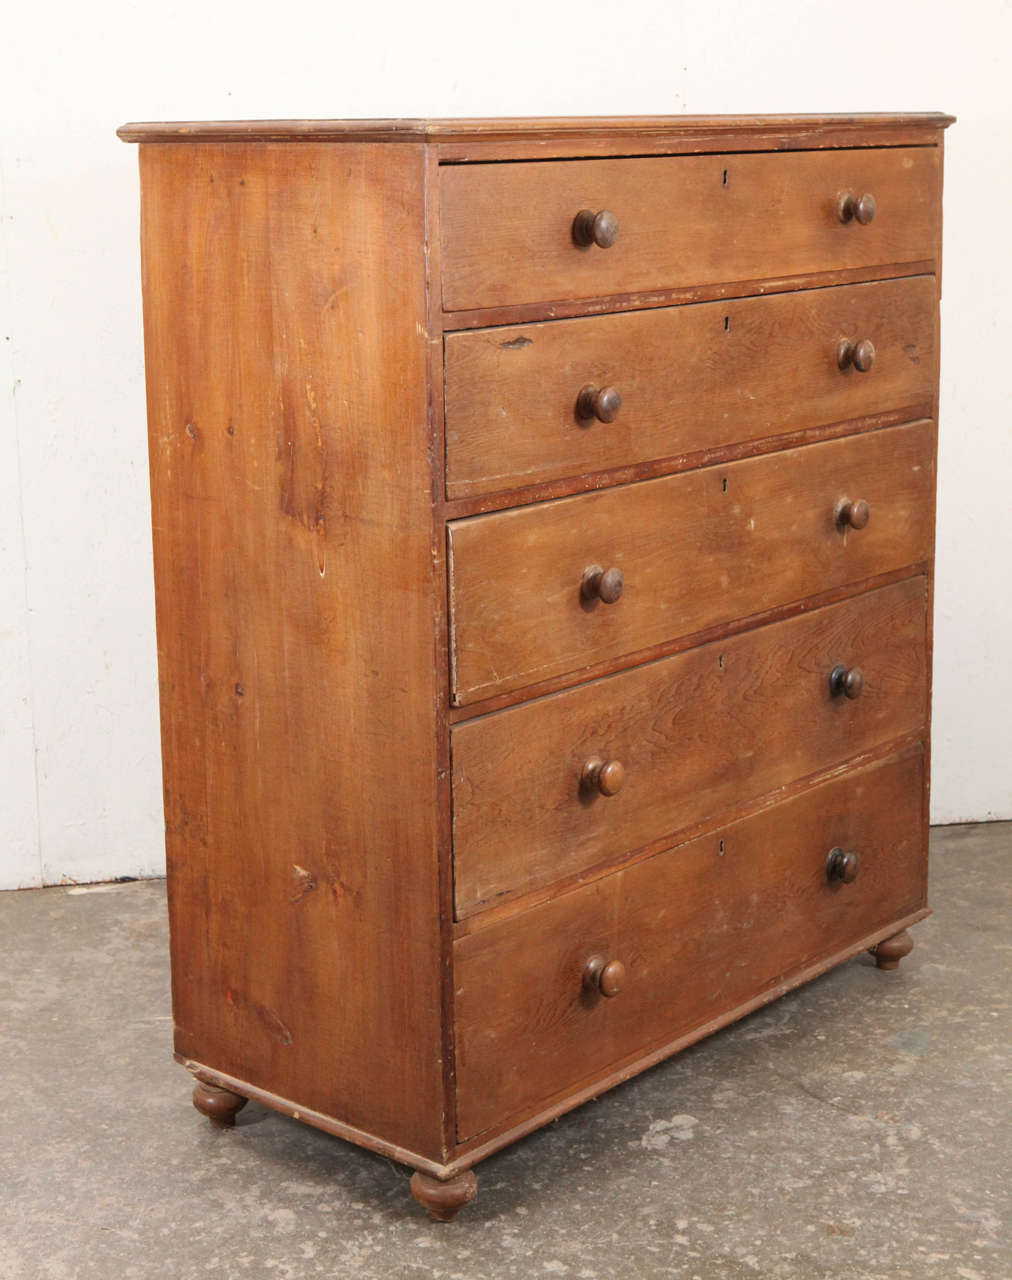 Vintage American chest of five drawers with turned wood knobs.